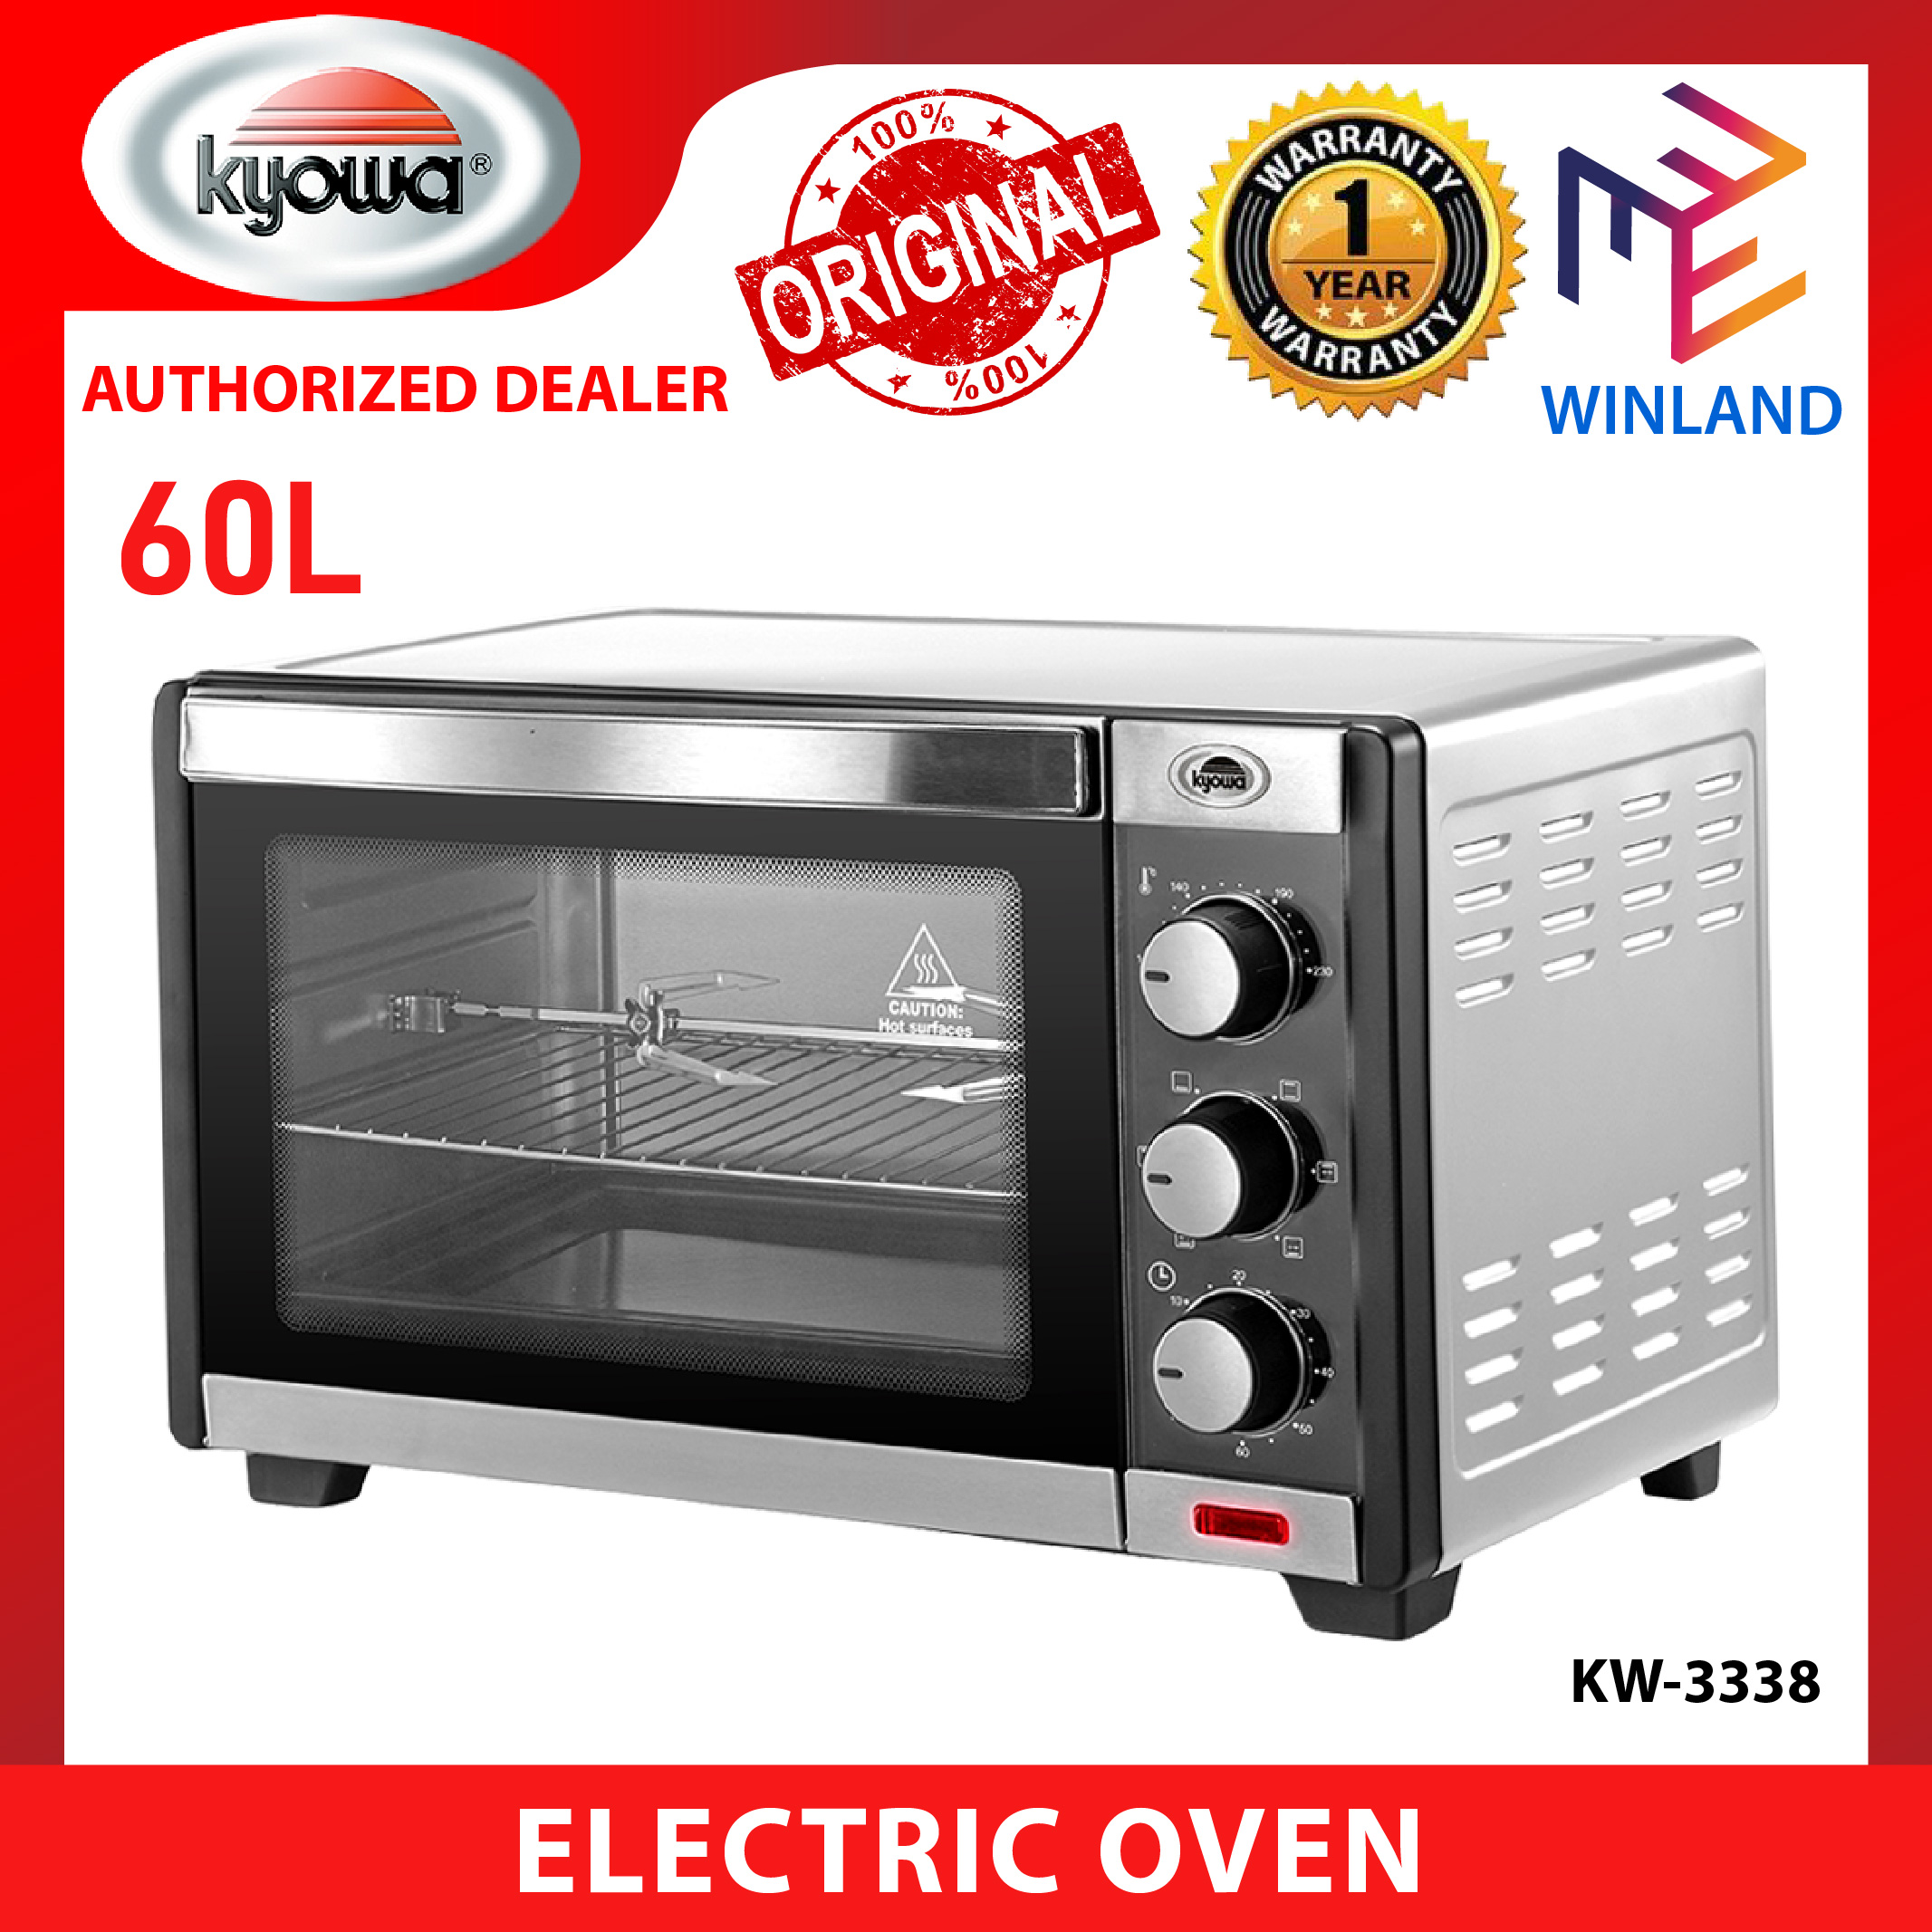 KYOWA Electric Oven with Rotisserie, 60L - KW-3338